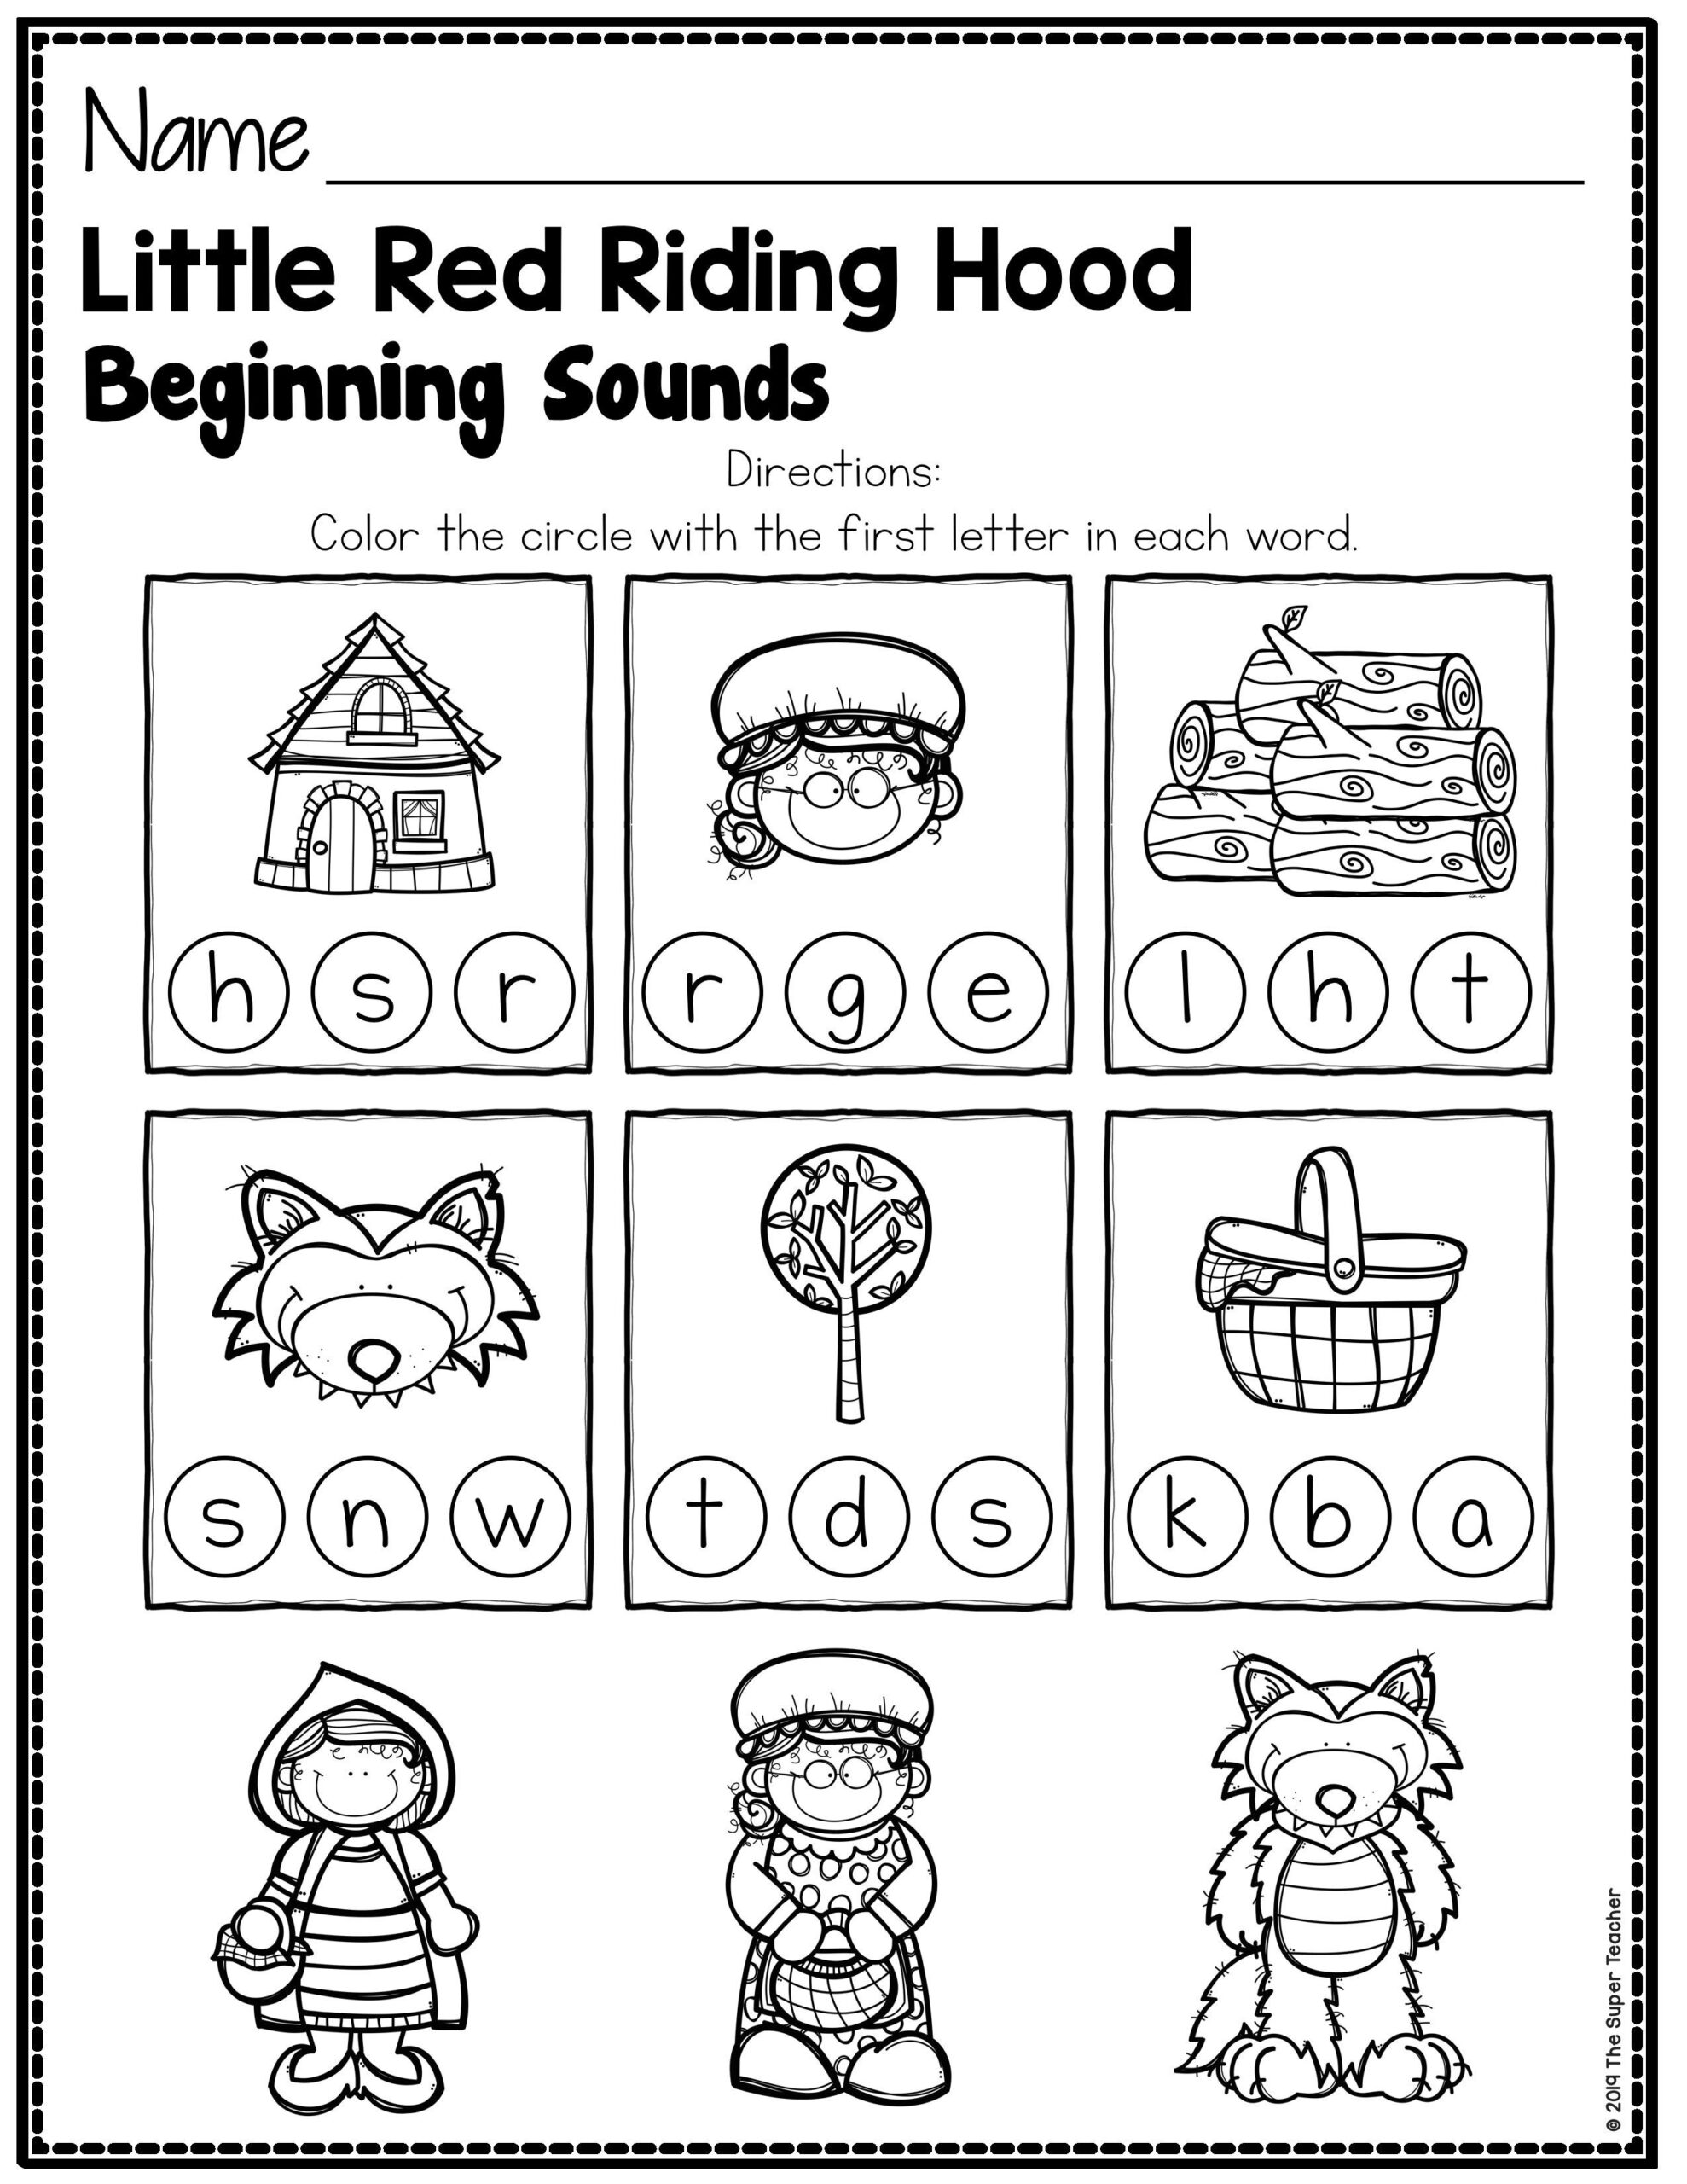 Little Red Riding Hood Story Elements And Story Retelling Worksheets 